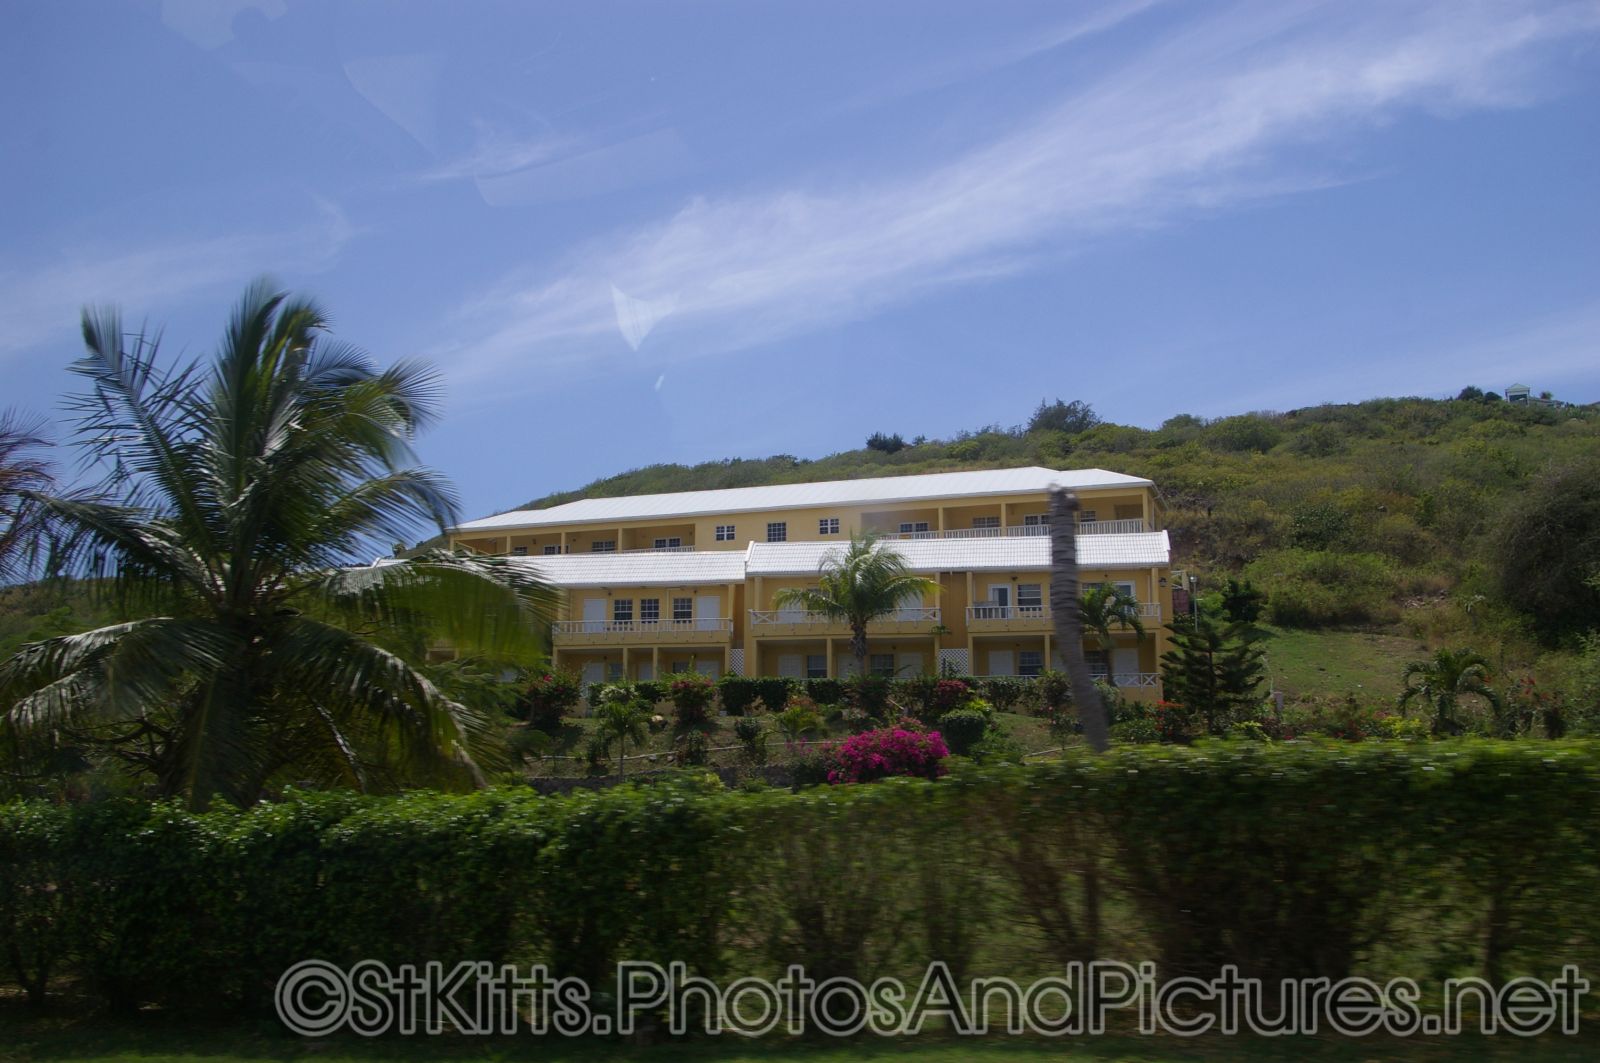 Large yellow housing complex in St Kitts.jpg
